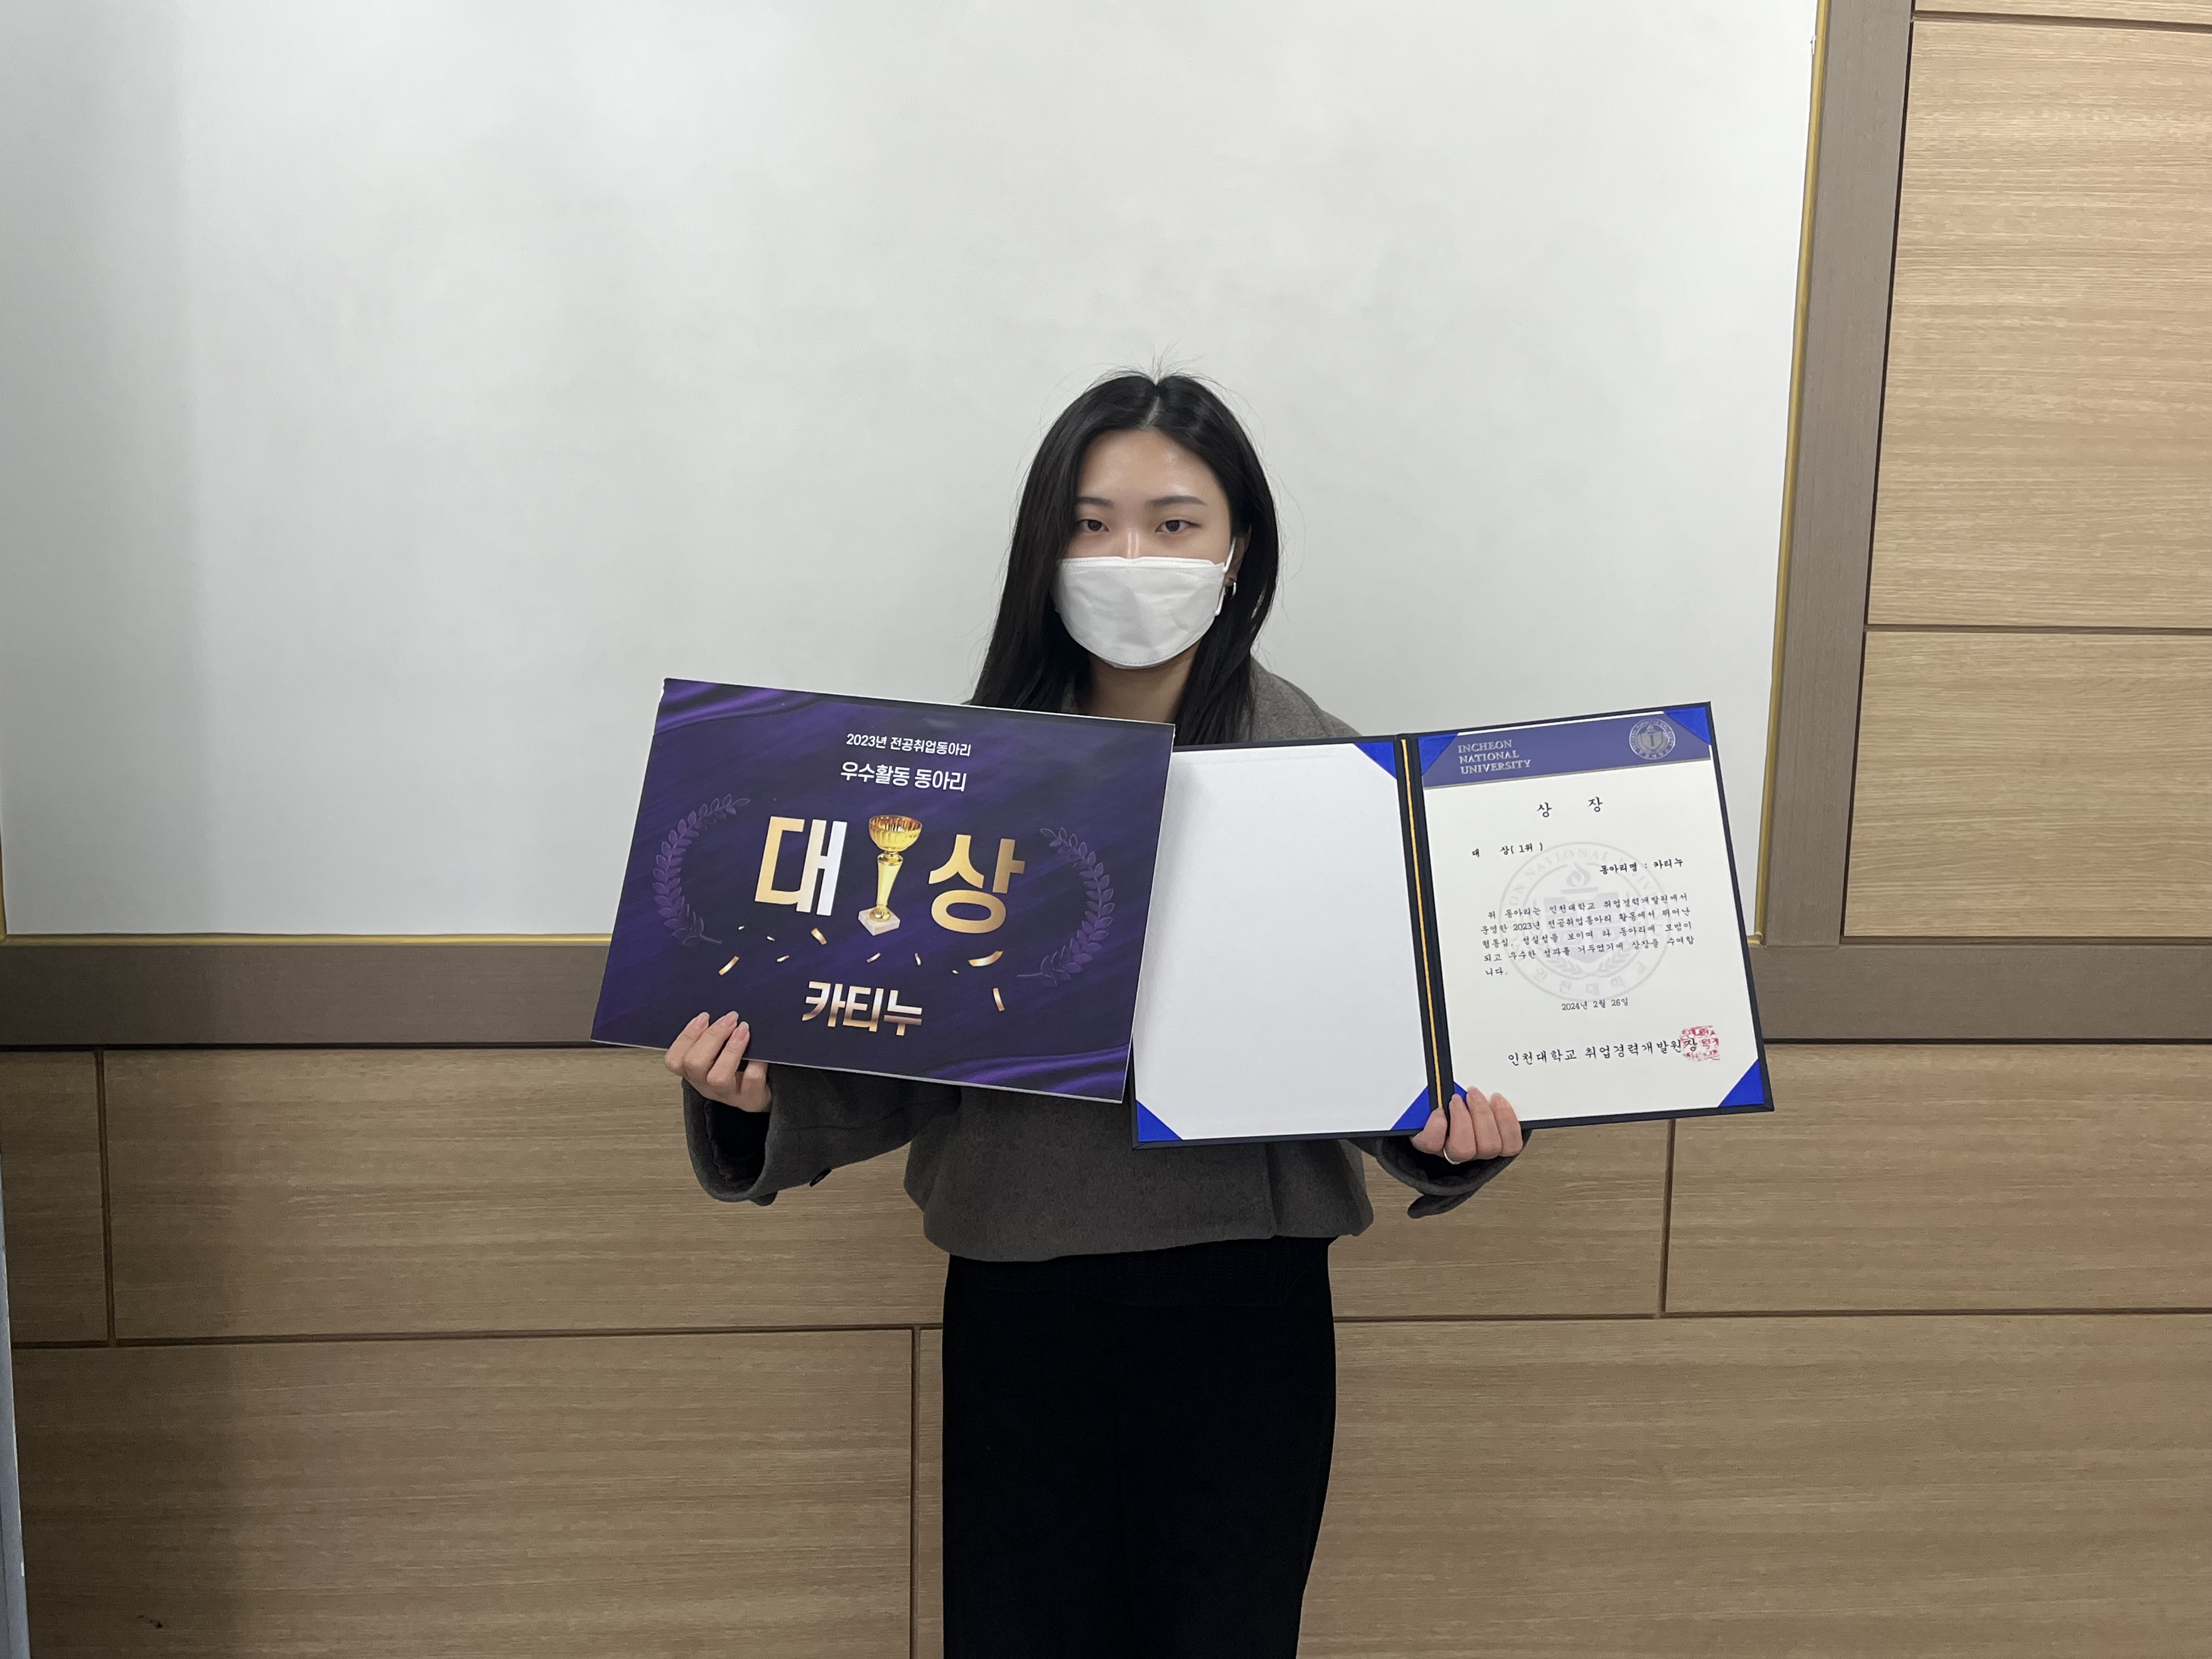 The listing and receipt of the prize of Umji Young (20), the representative of the "Catinu", a job club majoring in English literature at Incheon National University.